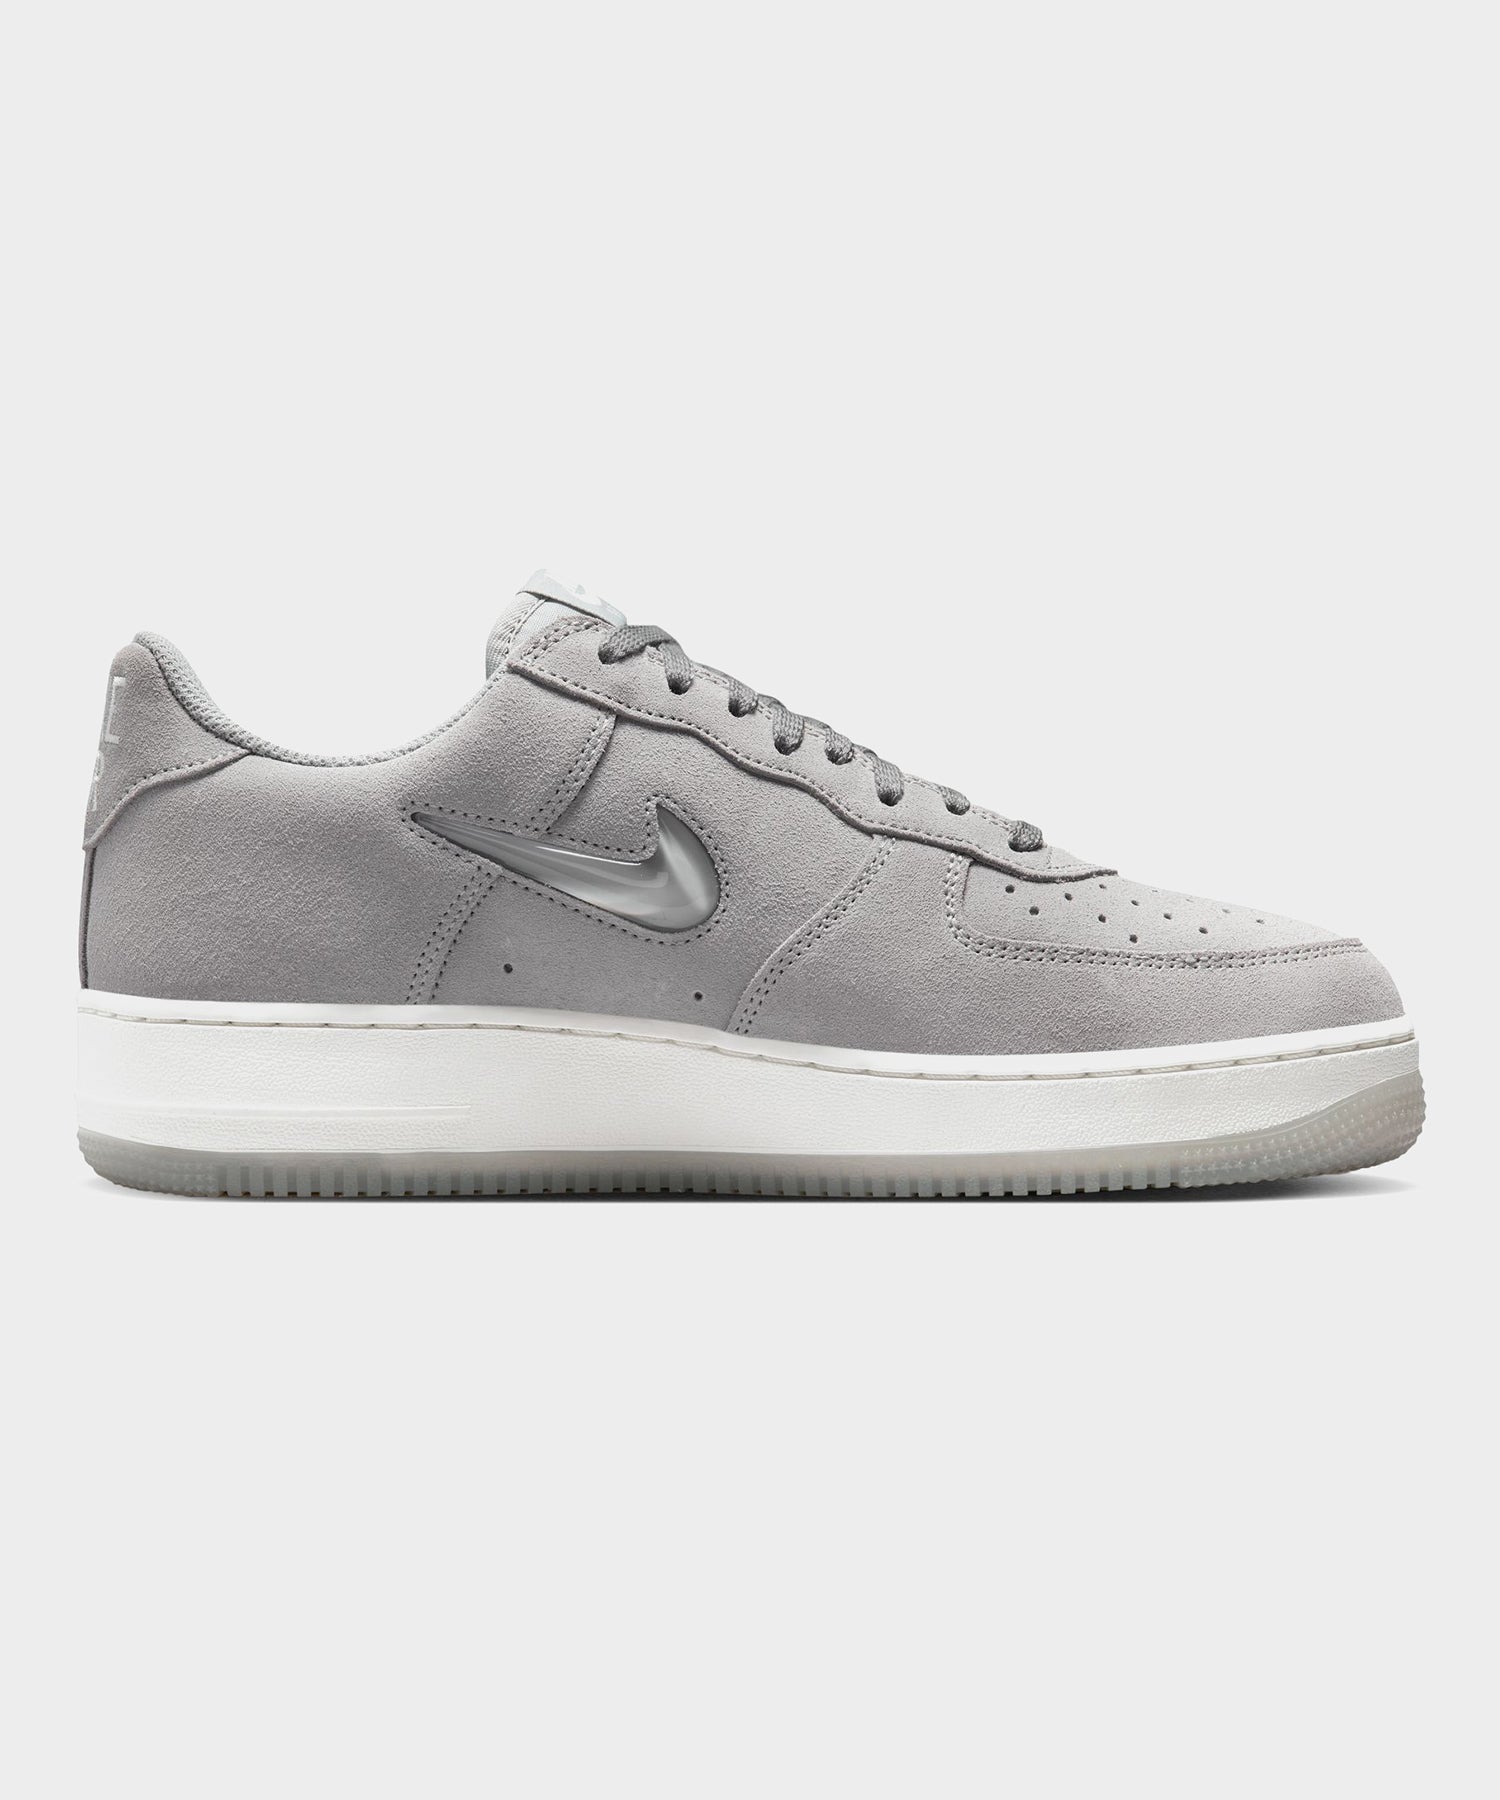 Empty Women's Nike Air Force One AF1 '07 Size 8 Gray